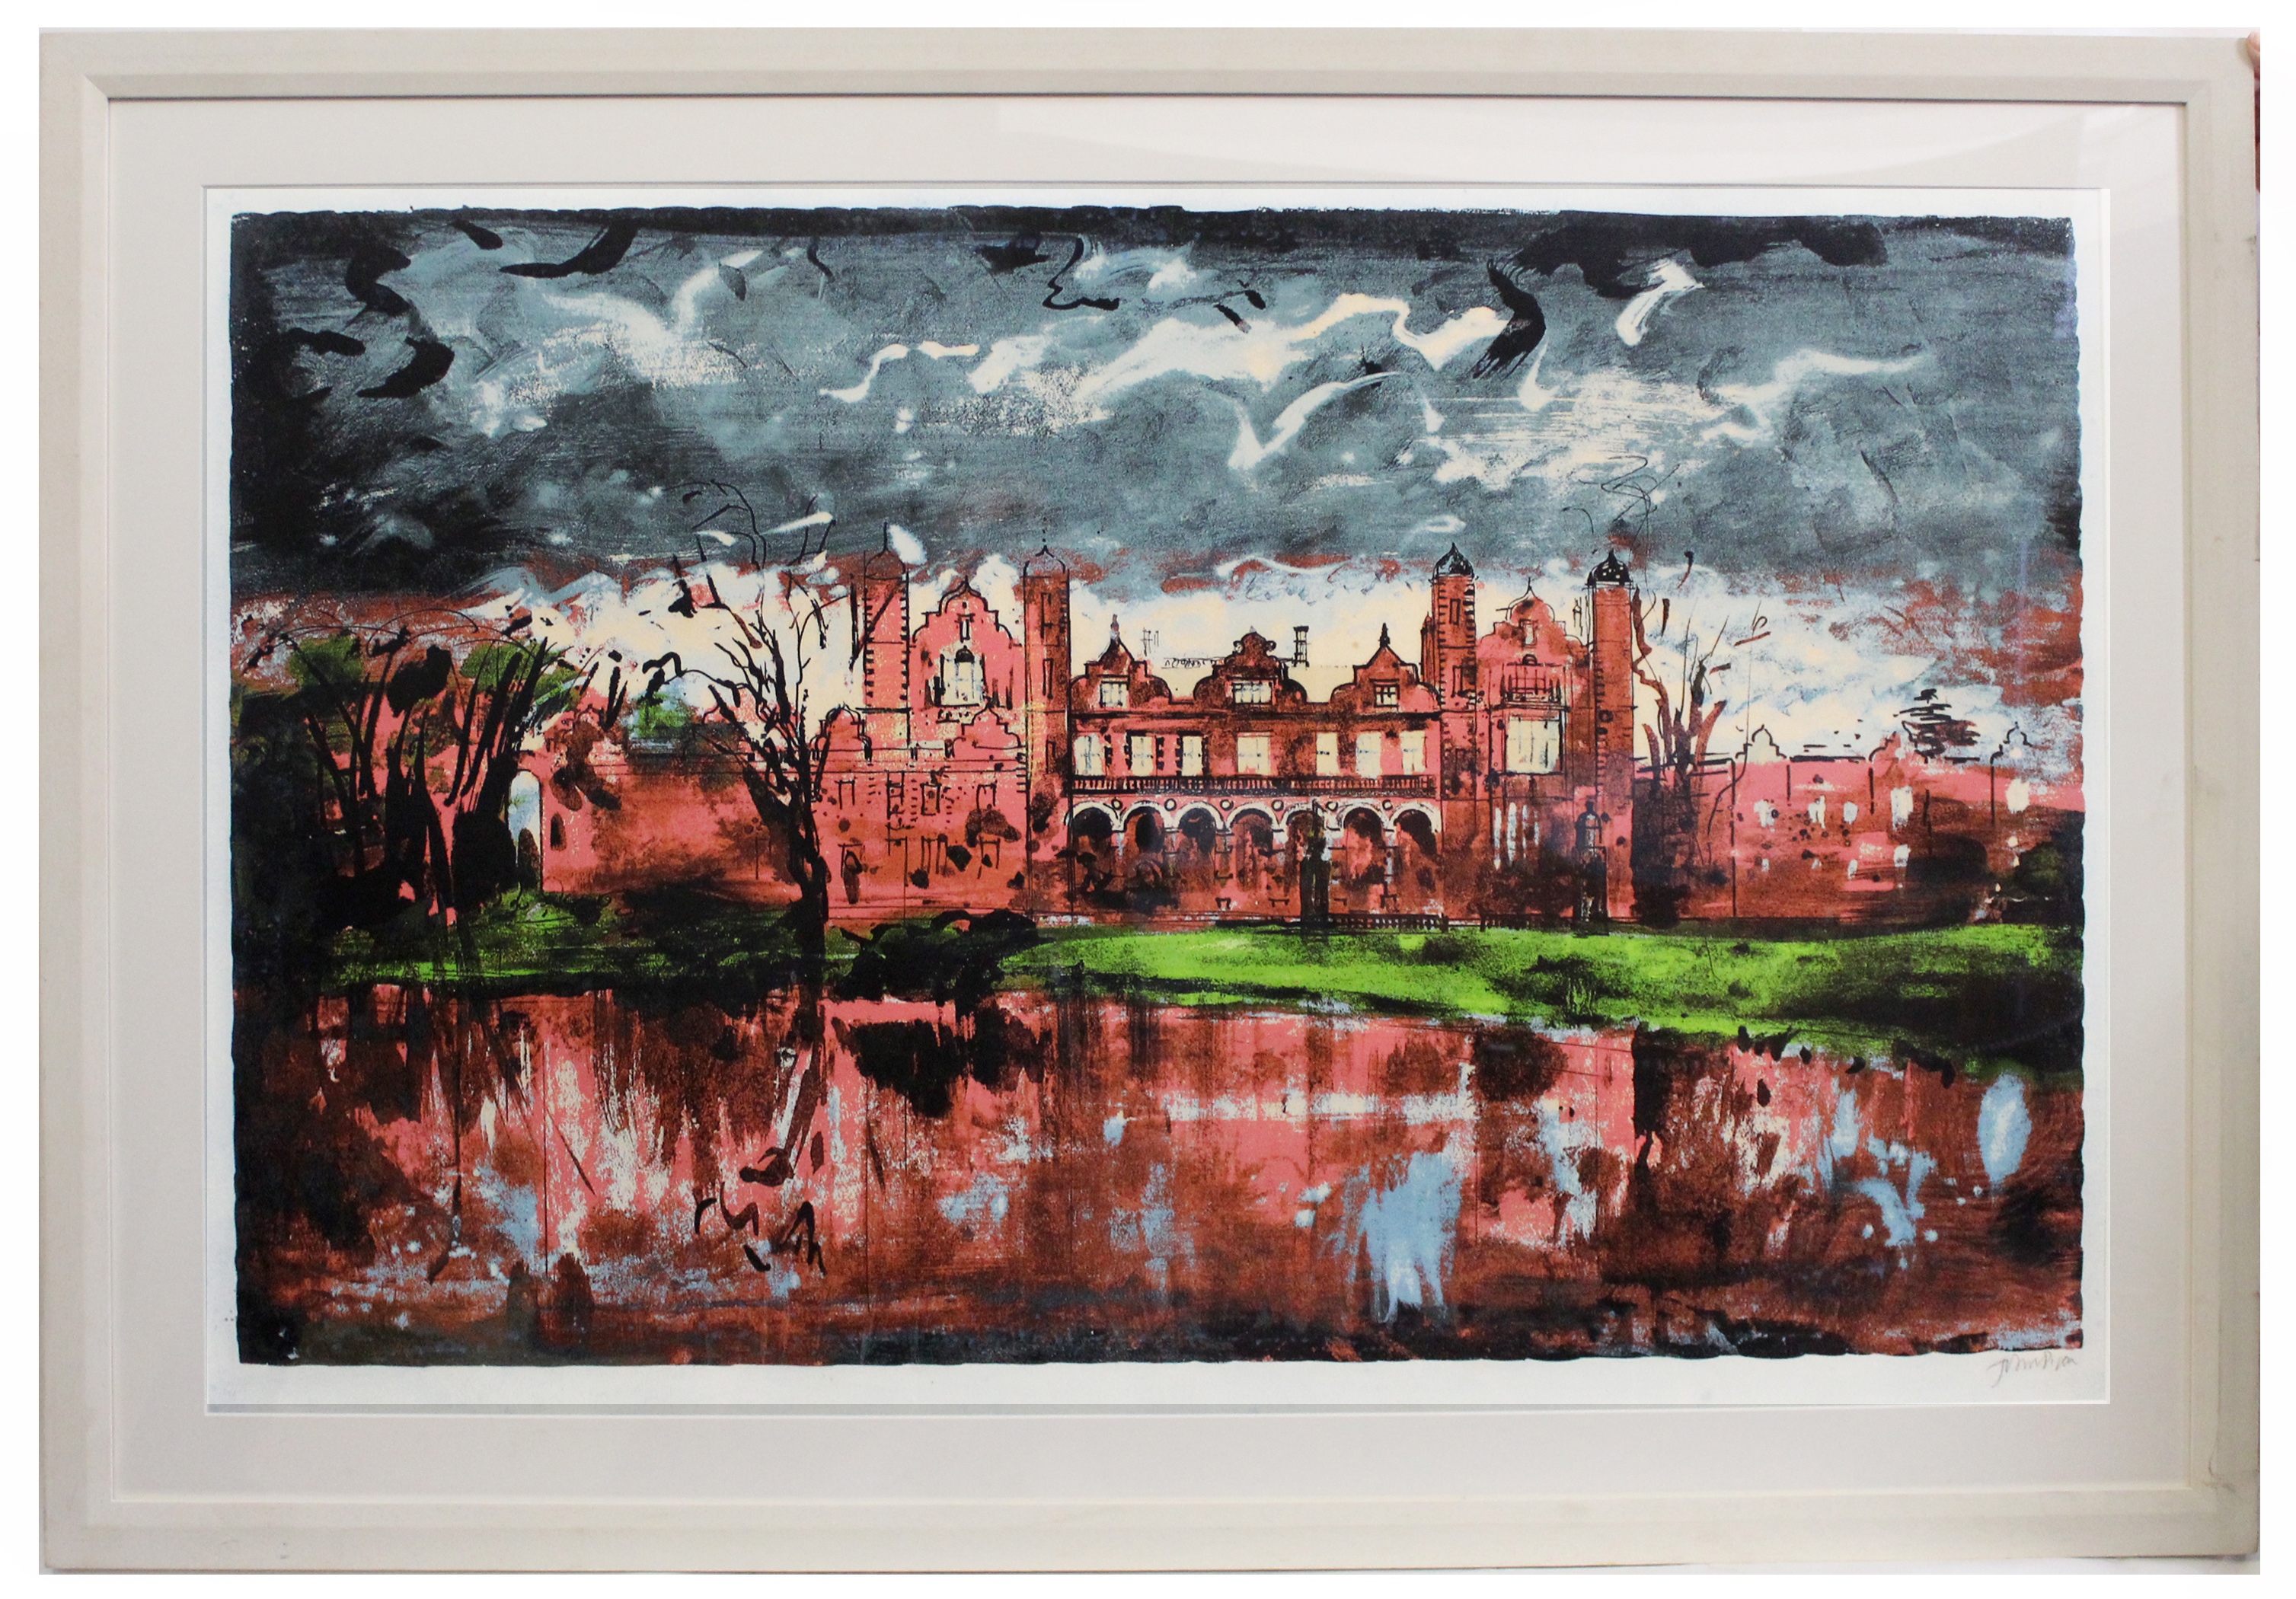 AR JOHN PIPER CH (1903-1992) “Capesthorne” (Levinson 268)lithograph, signed and numbered - Image 2 of 2